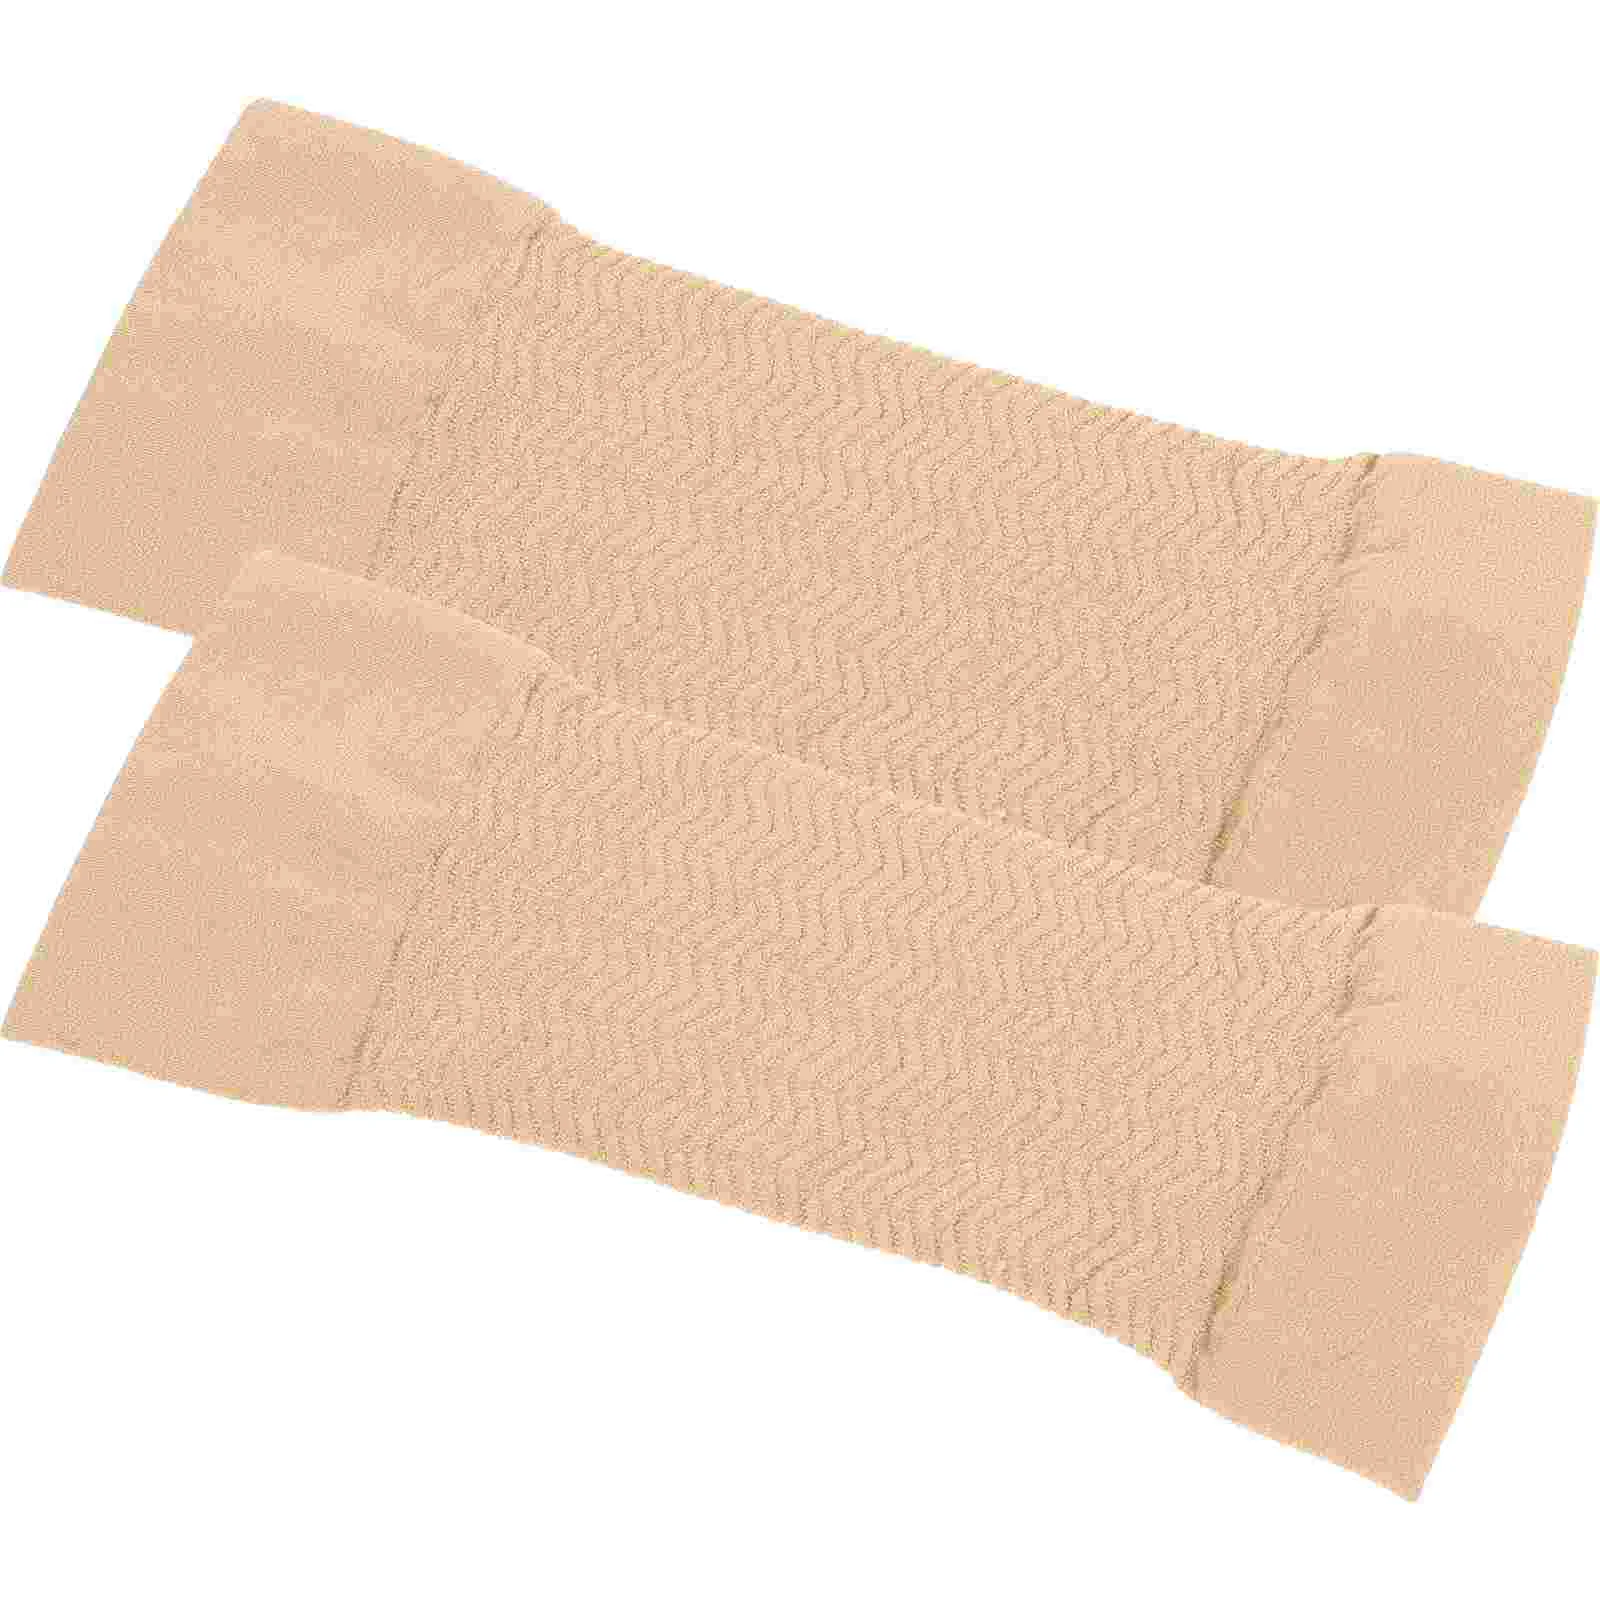 

Elastic Compression Arm Sleeves Slimming Improve Shaper Sleeve Protective Upper Arms Shaper Sleeve for Fitness (Beige)